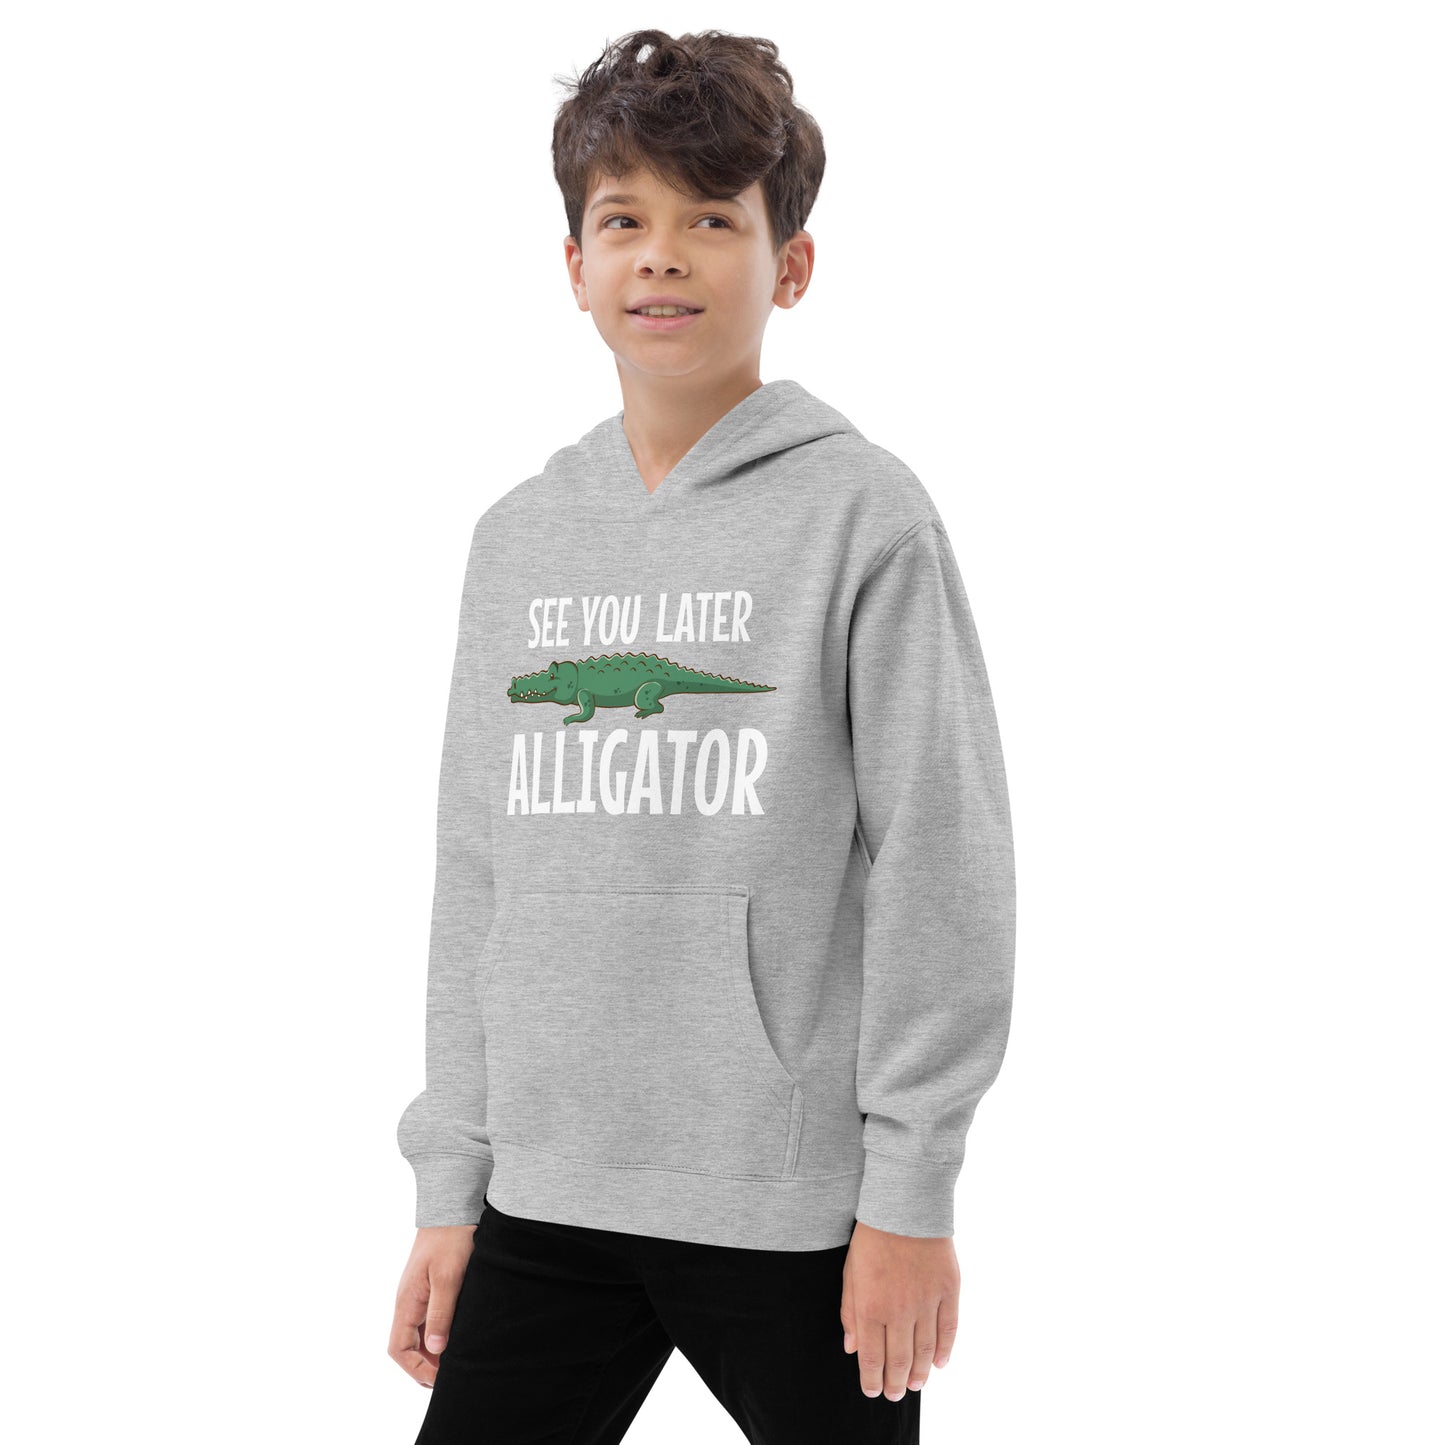 See You Later Alligator / Kids Hoodie